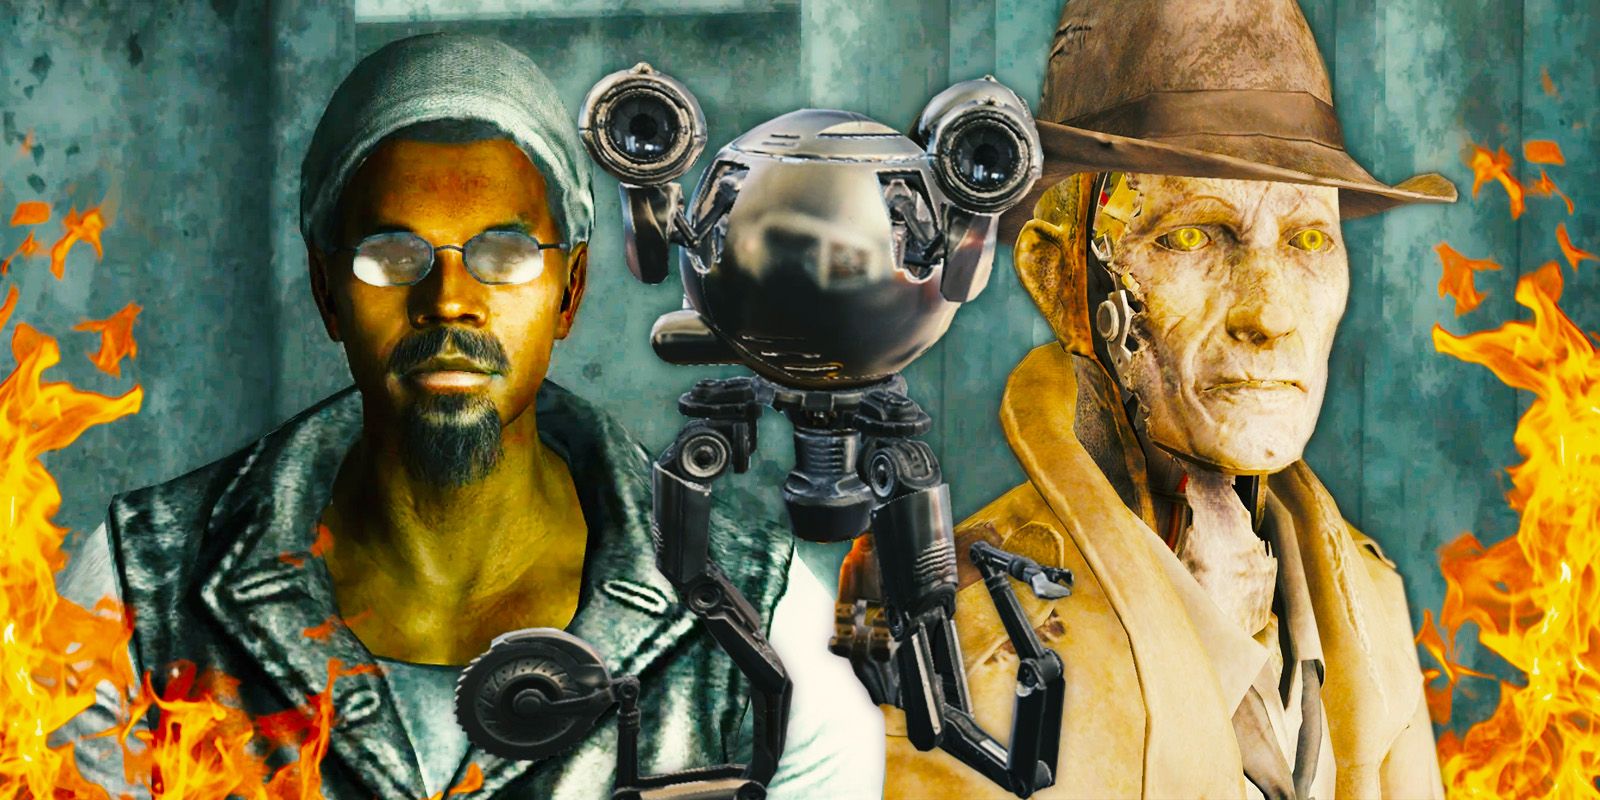 Three Dog, Codsworth, and Nick Valentine from the Fallout games.